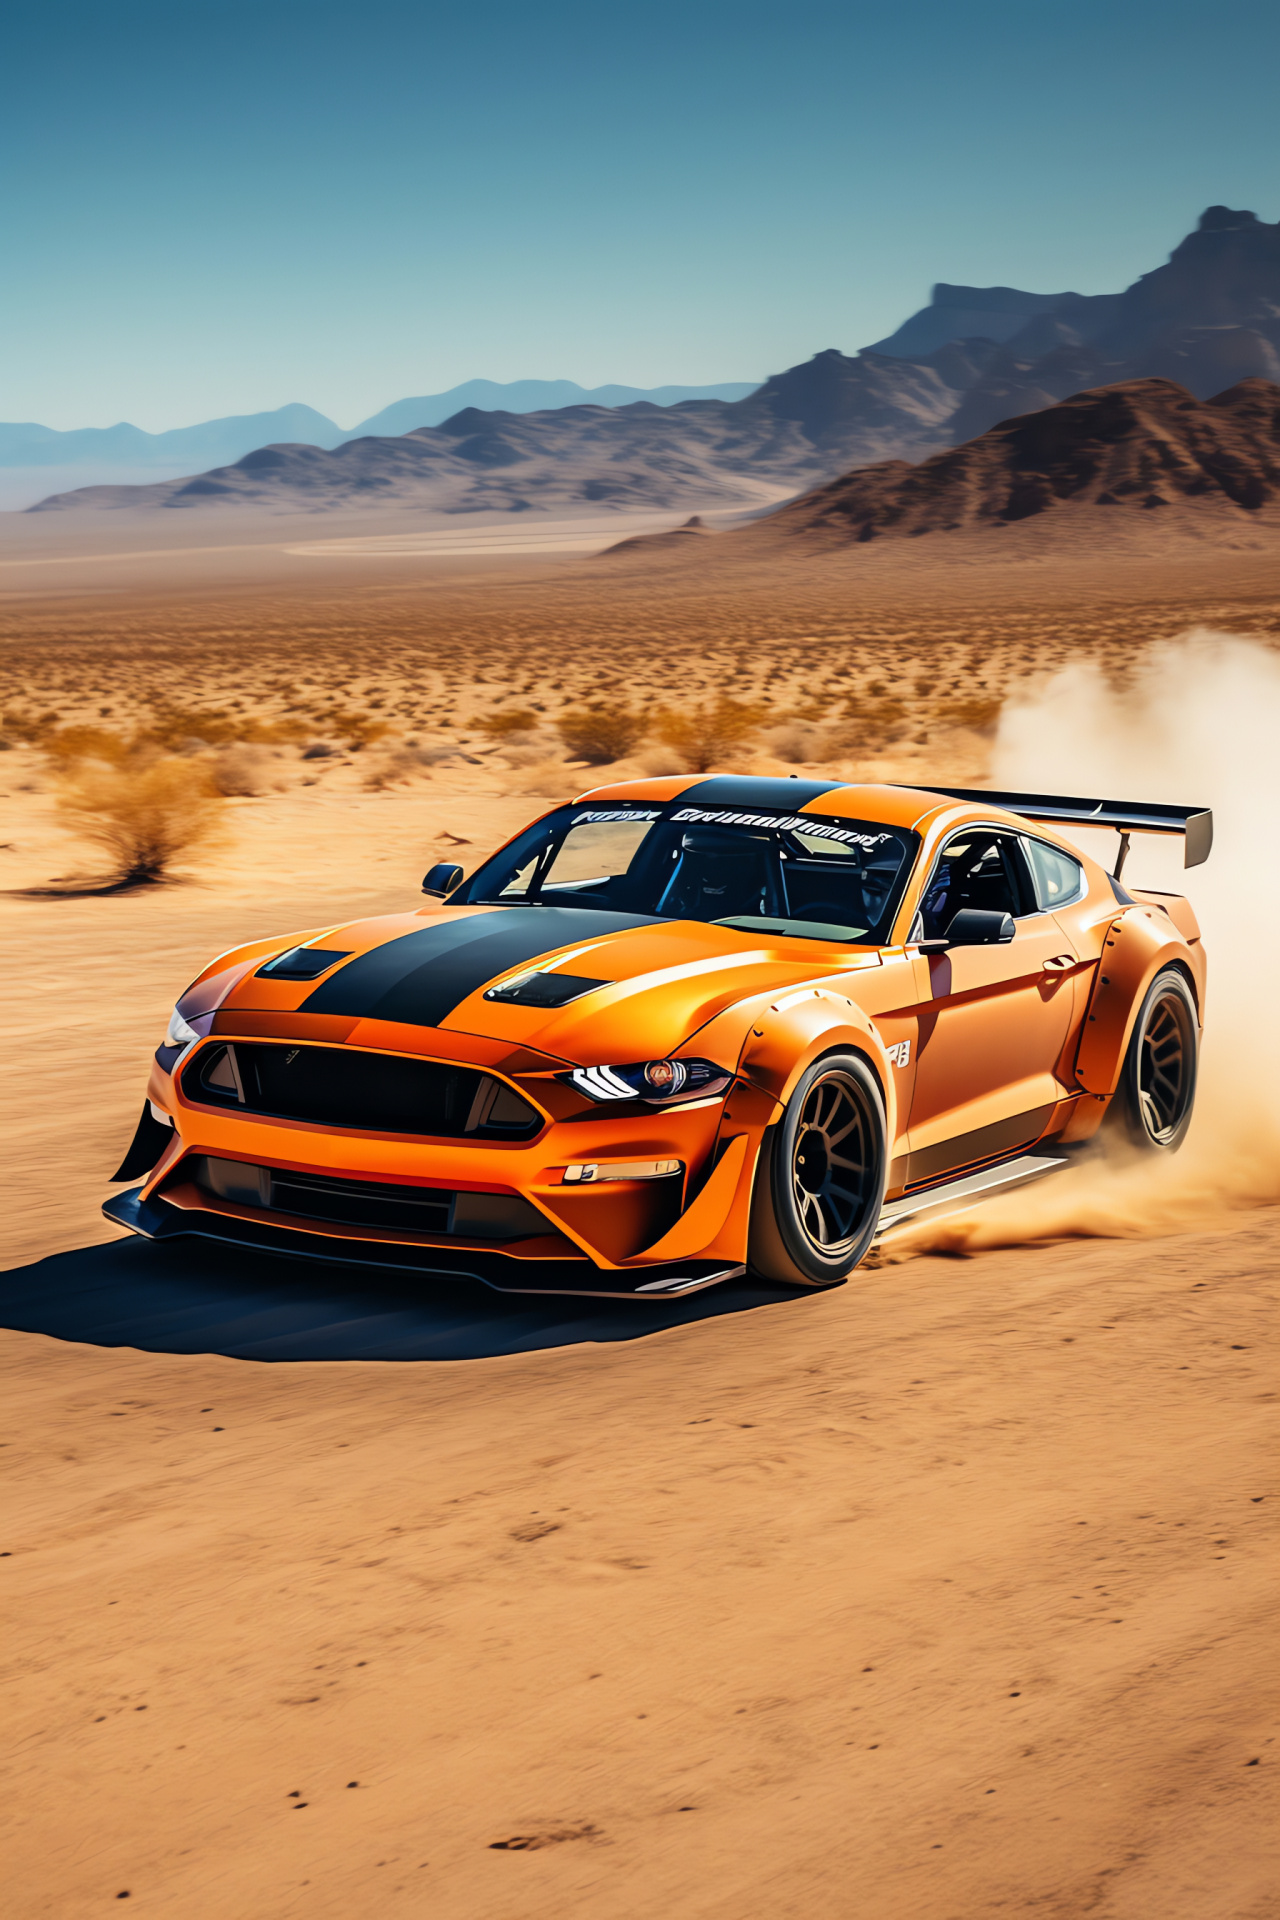 Rocket Bunny Ford Mustang, Arid desert scene, Expansive off-road view, Automobile drifting portrayal, Rugged terrain action, HD Phone Wallpaper